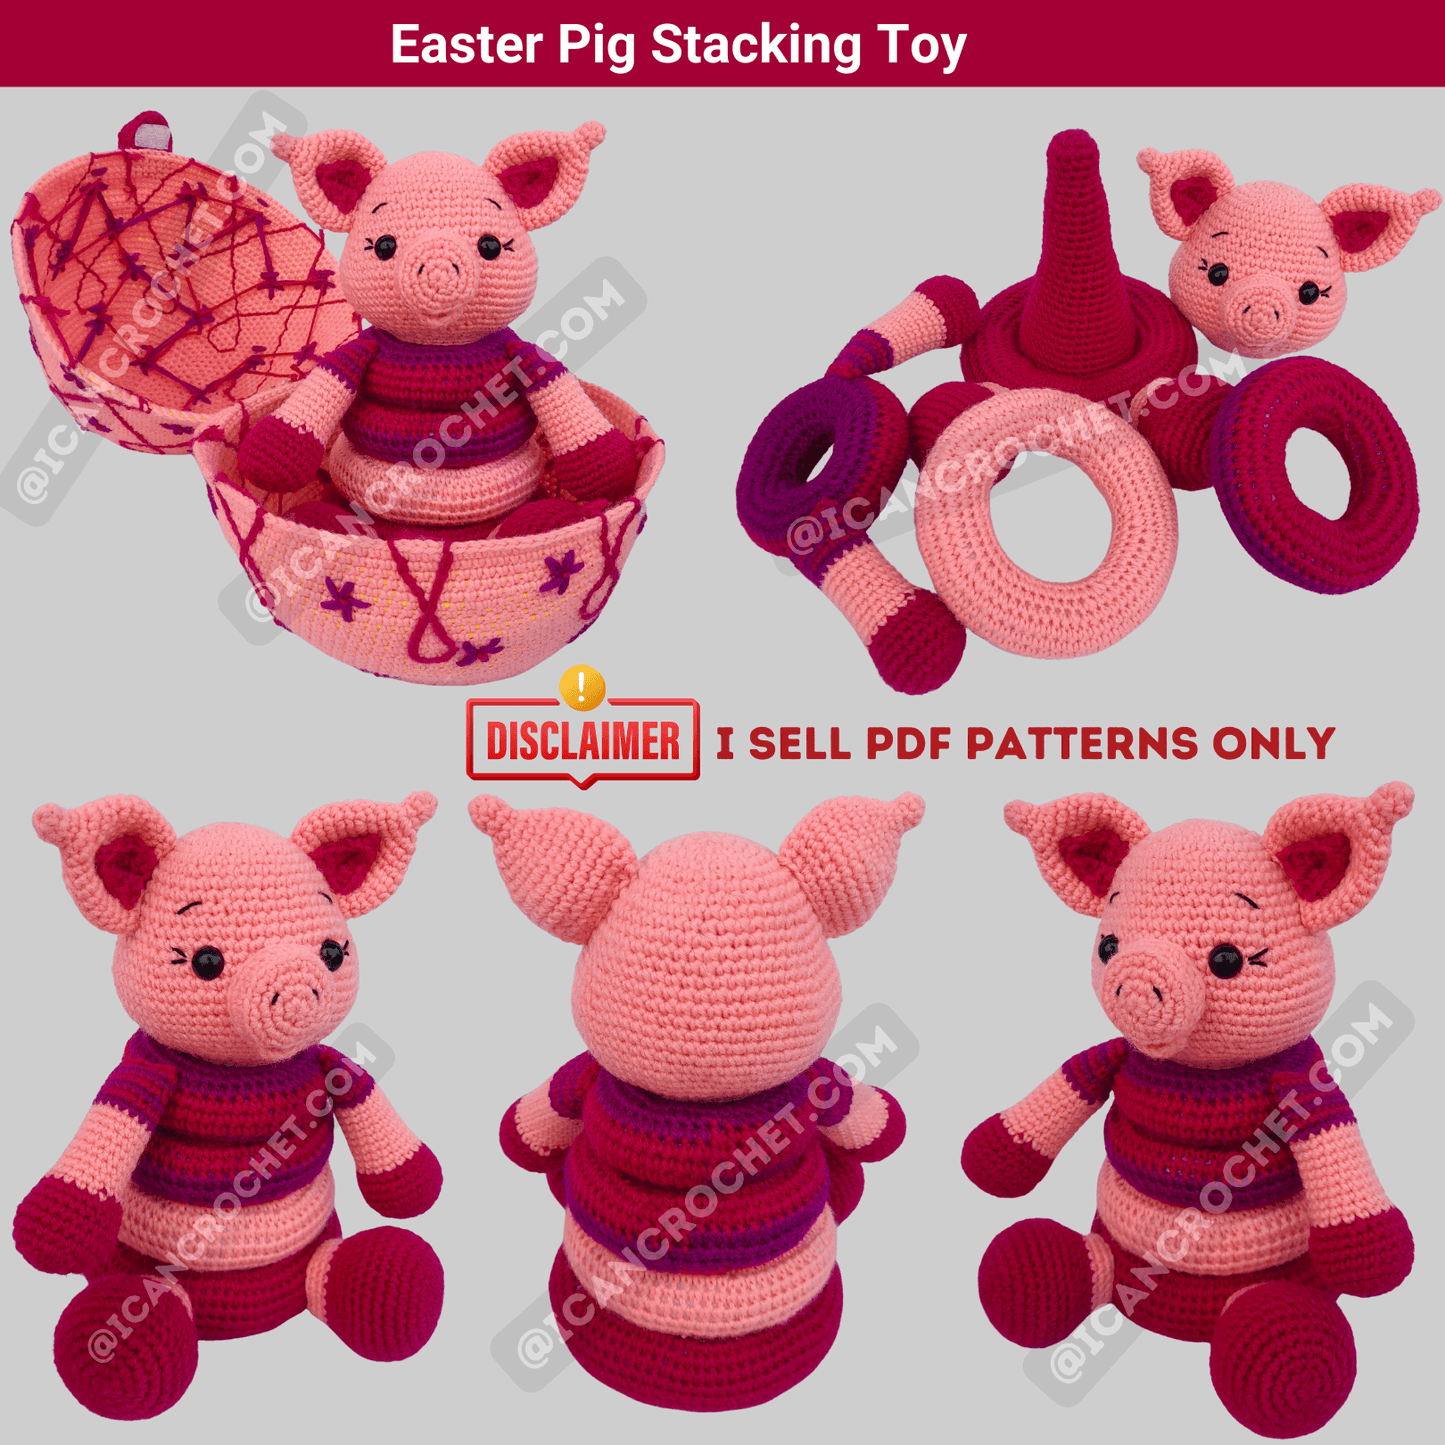 Easter pig with egg crochet toy pattern